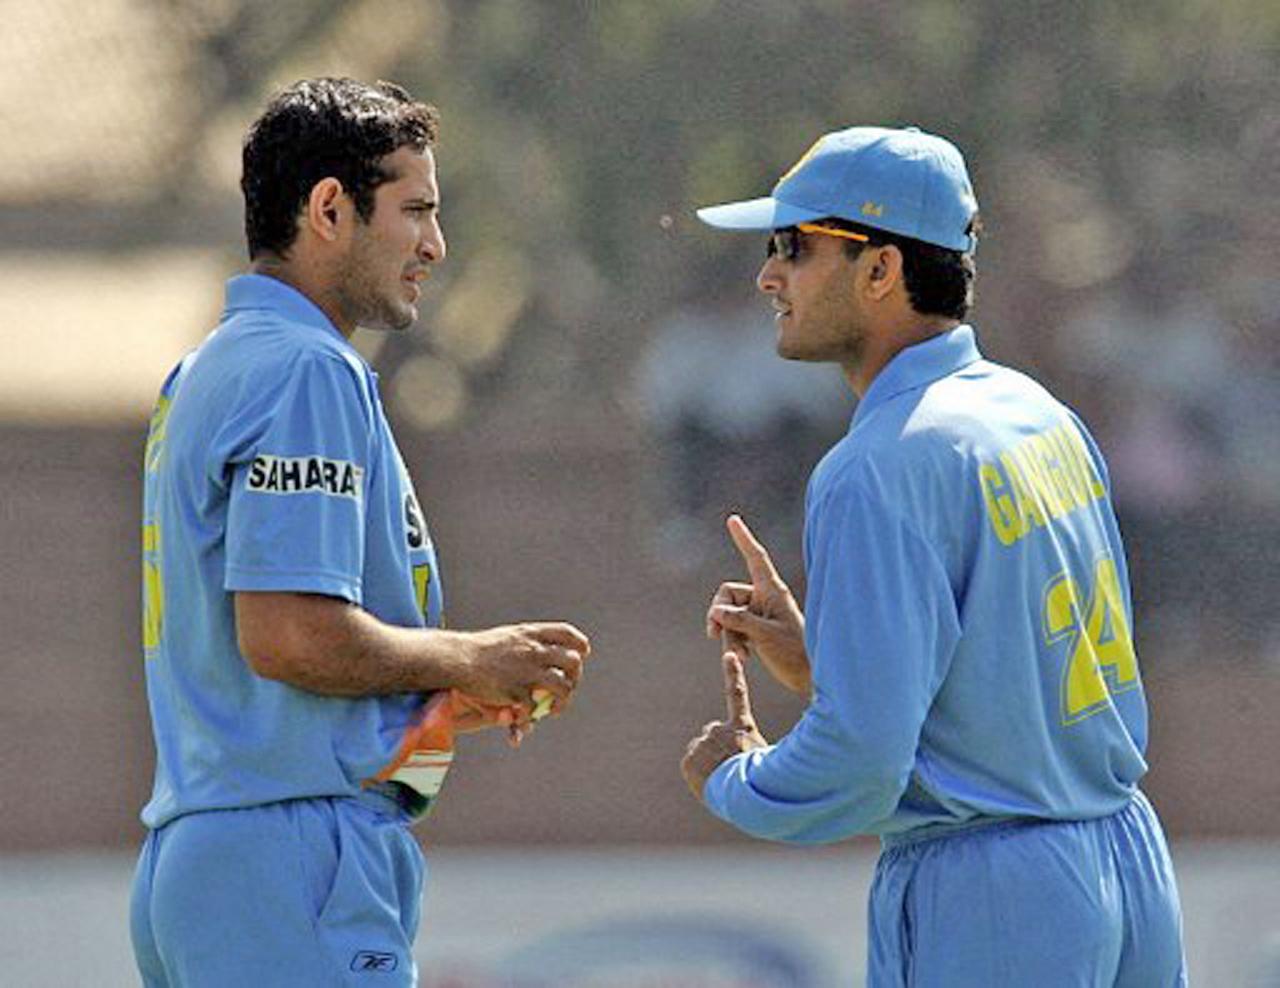 Irfan Pathan made his ODI debut in 2004 and played 120 matches scoring 1,544 runs and taking 173 wickets. His best bowling is 5/27 and he has 5 fifties under his belt. His last ODI came in 2012